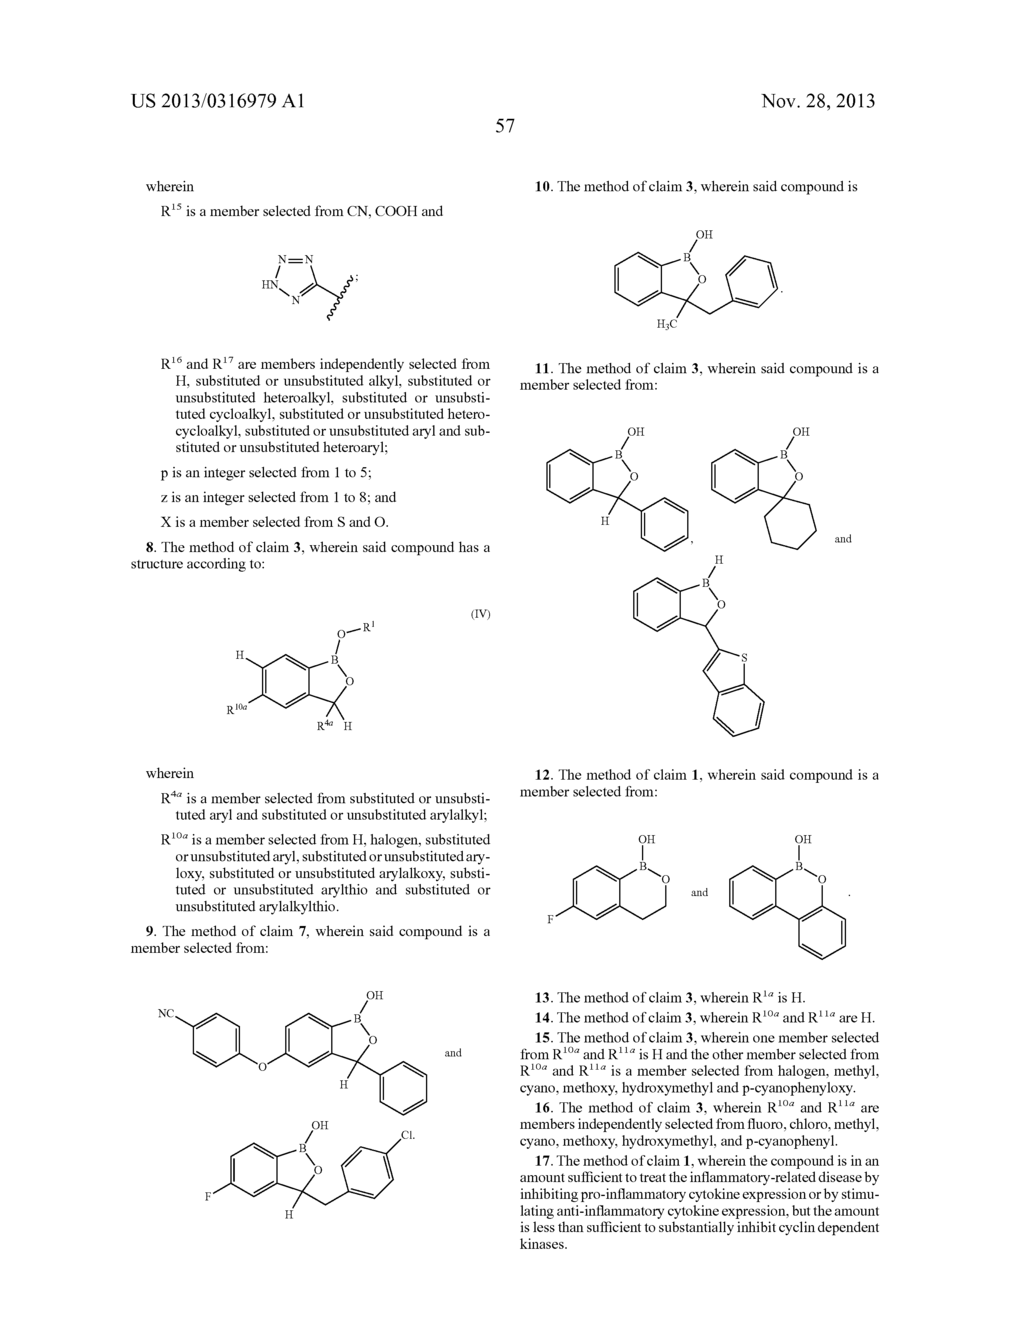 BORON-CONTAINING SMALL MOLECULES AS ANTI-INFLAMMATORY AGENTS - diagram, schematic, and image 79